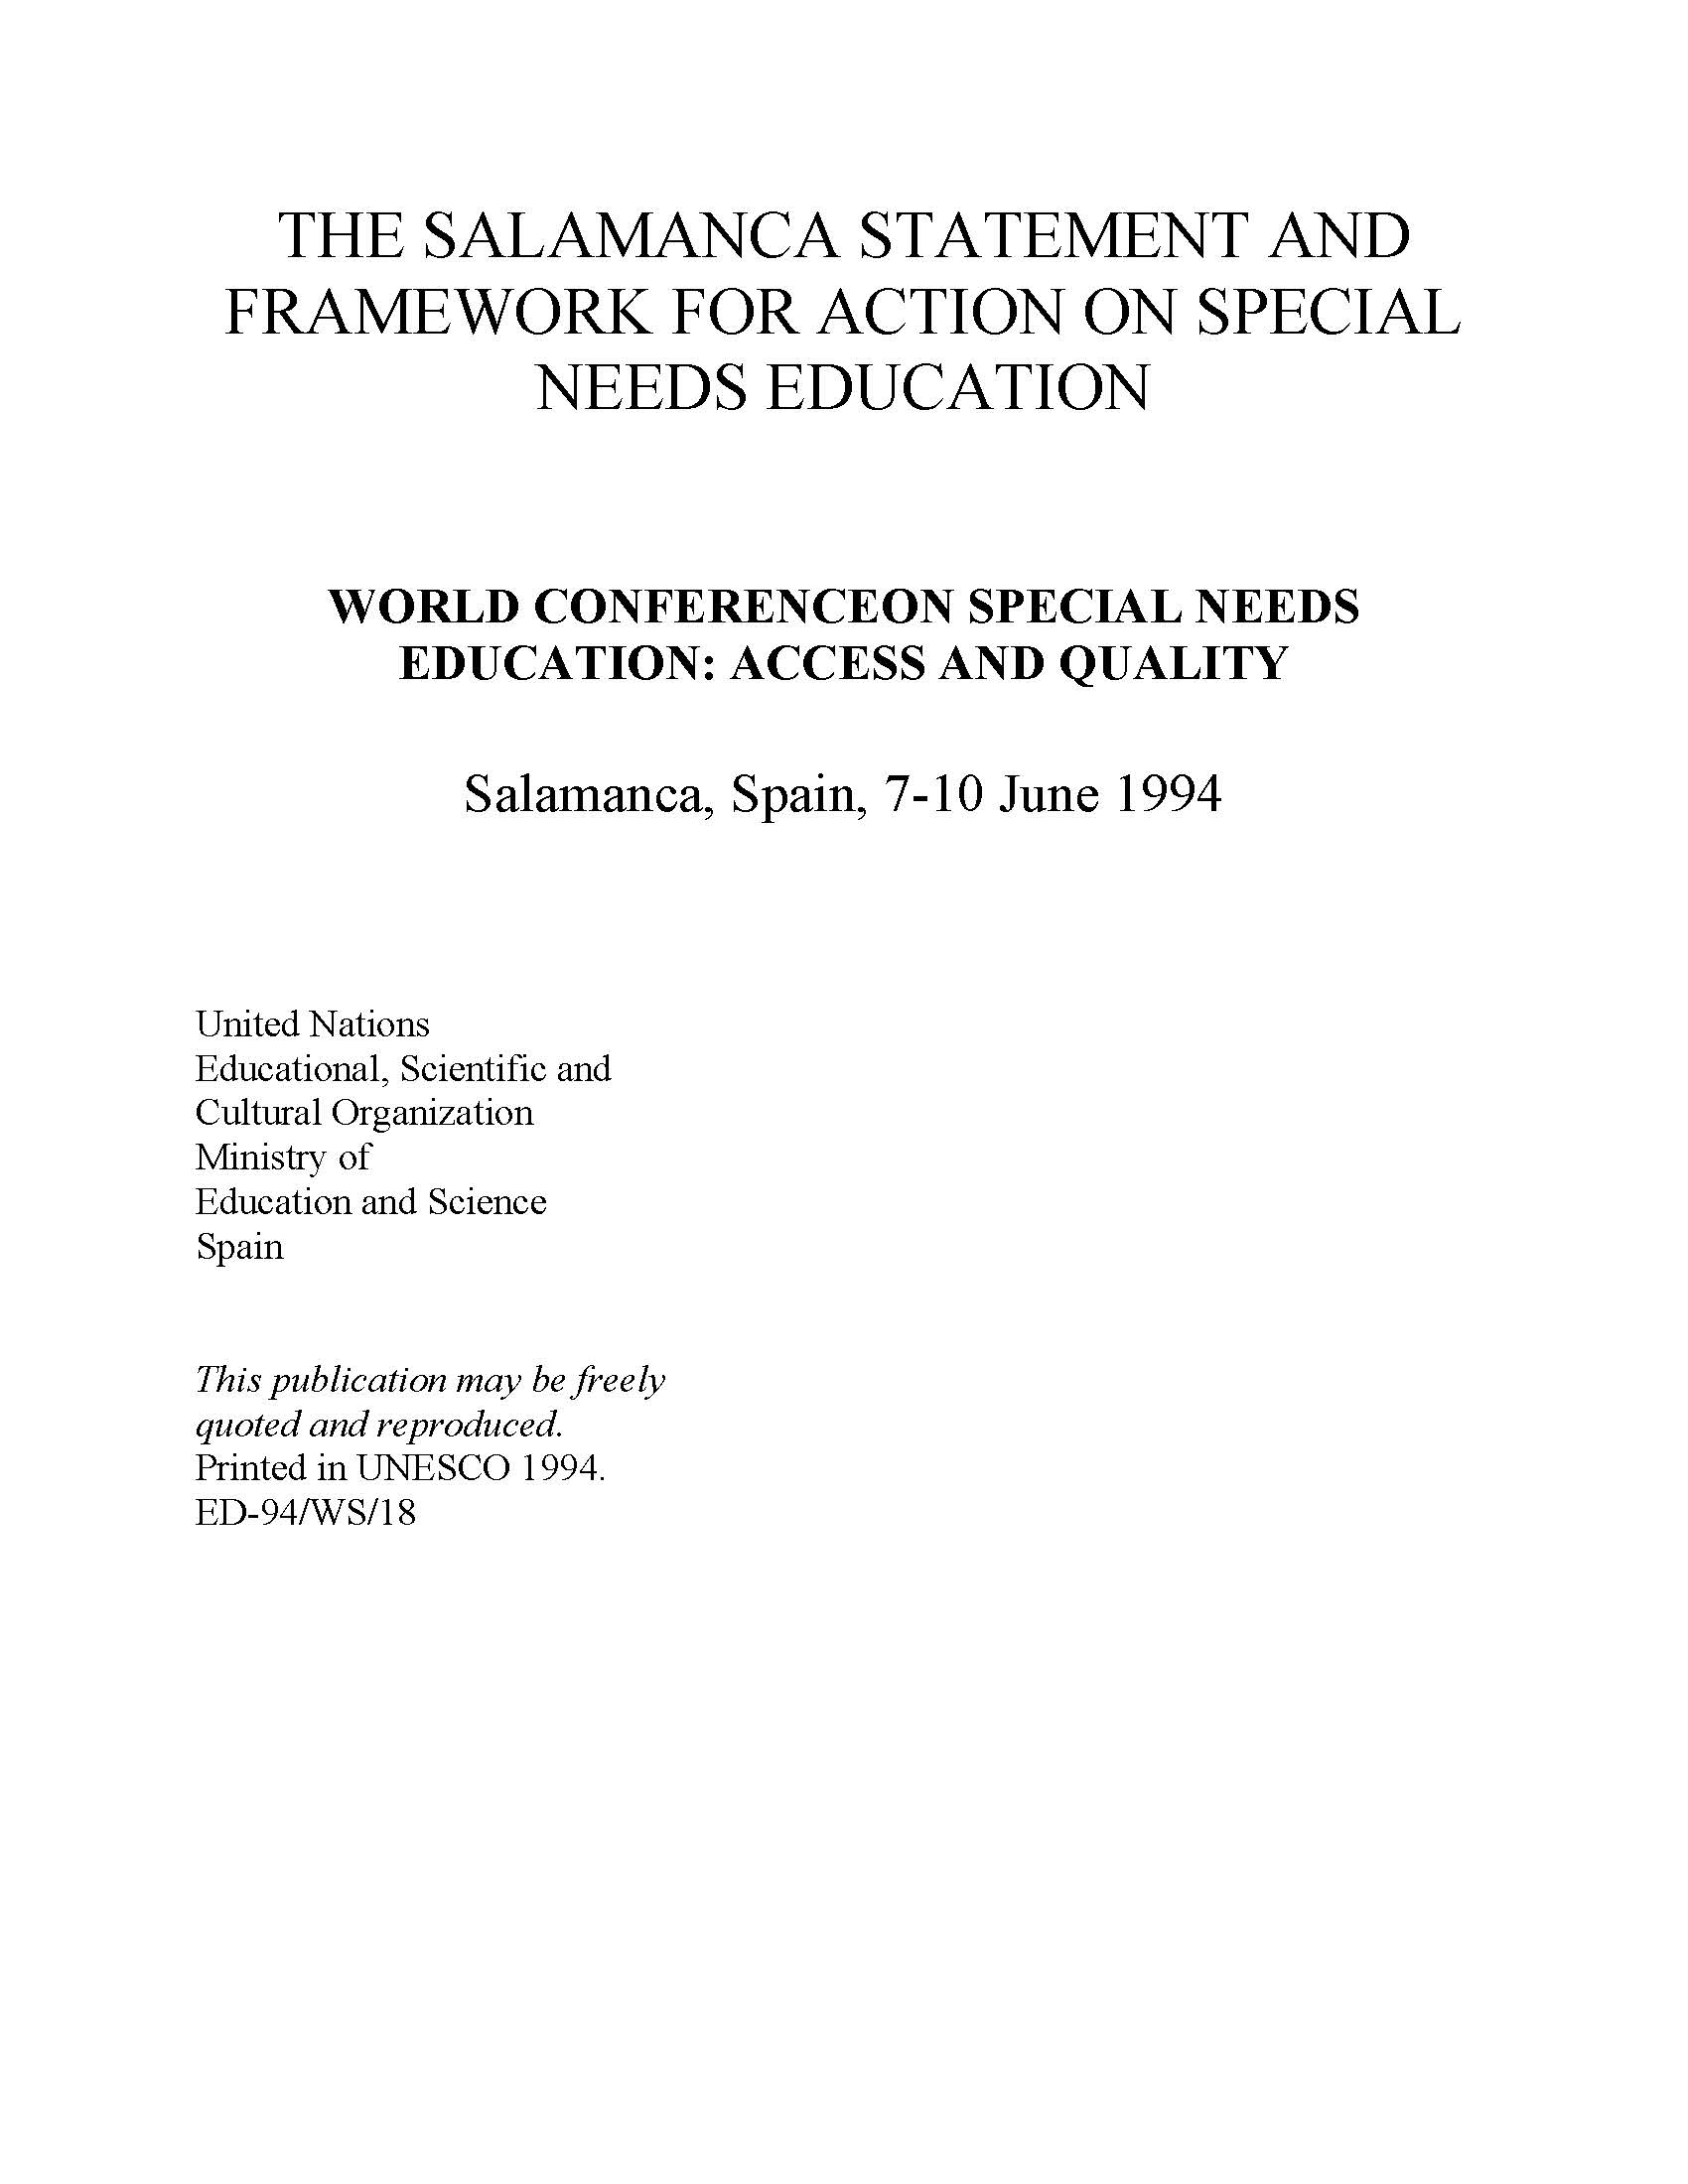 The Salamanca statement and framework for action on special needs education